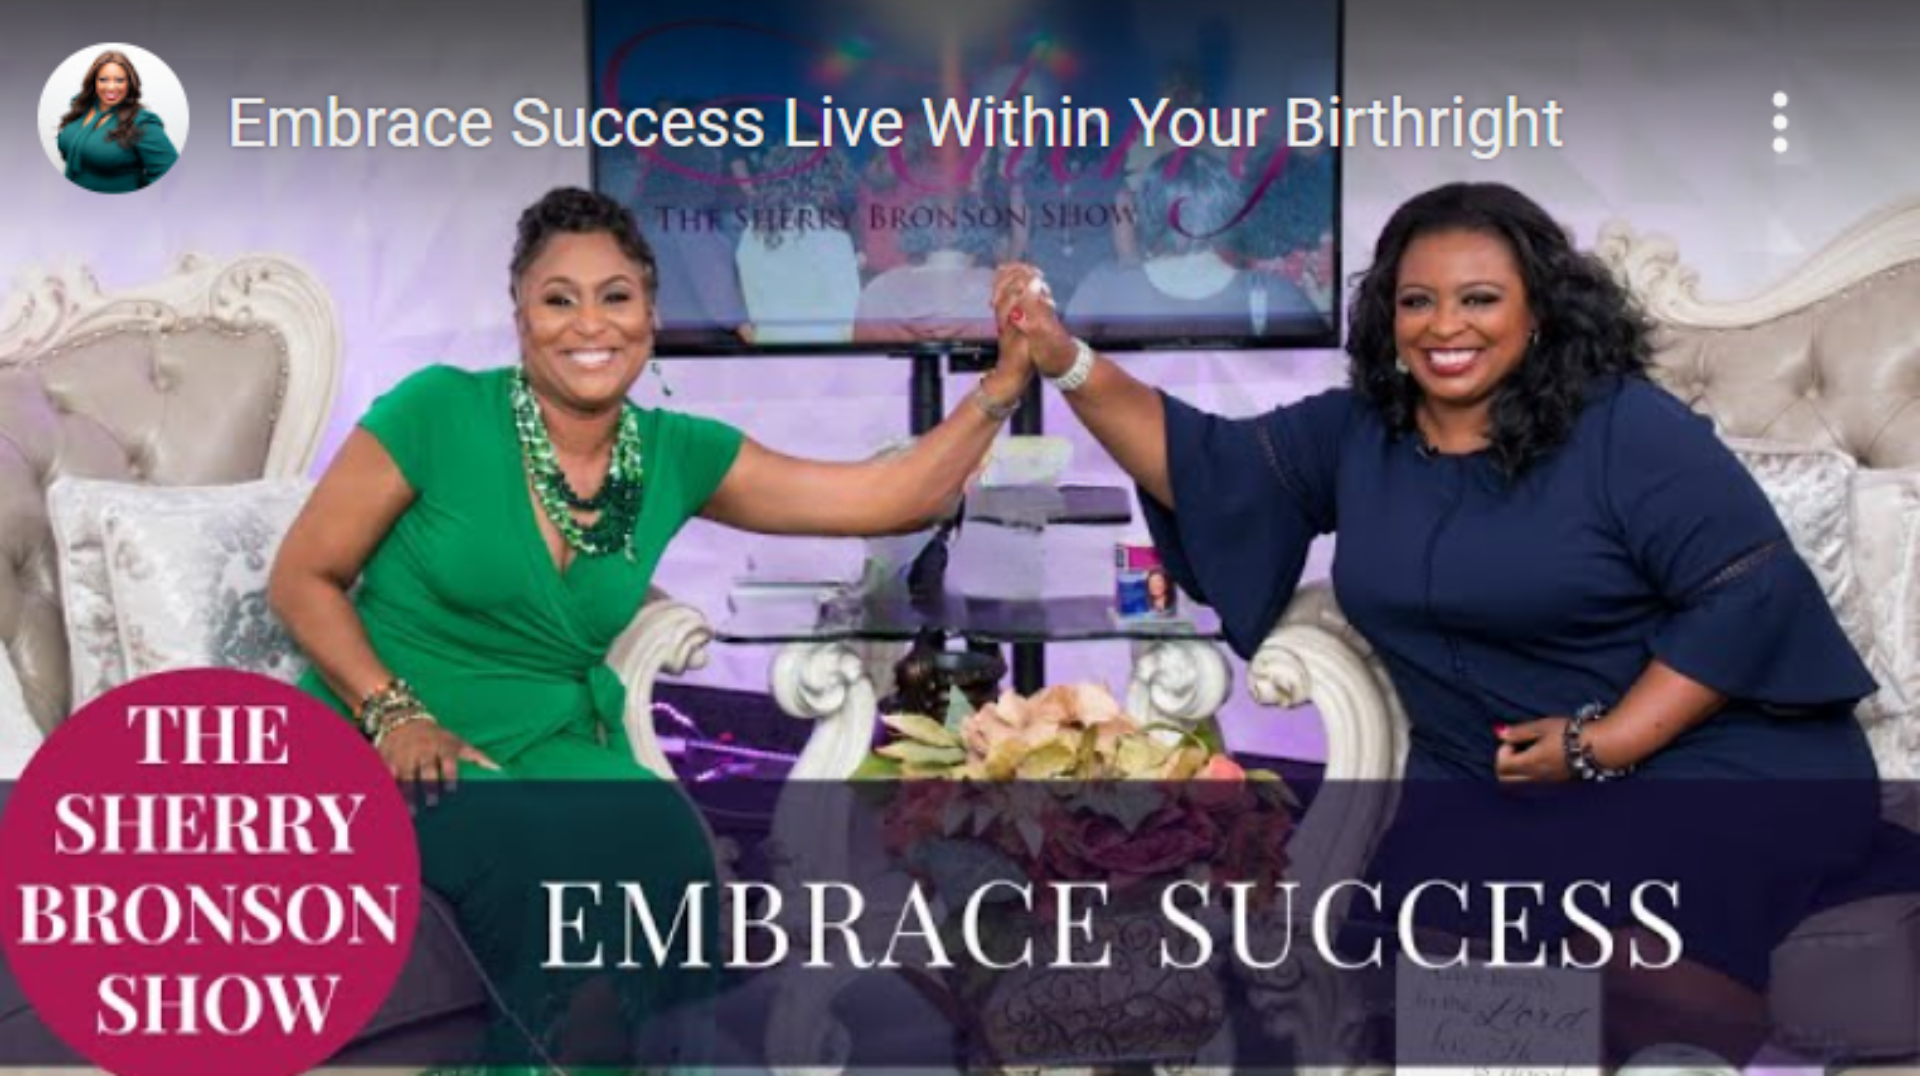 Embrace Success Live Within Your Birthright